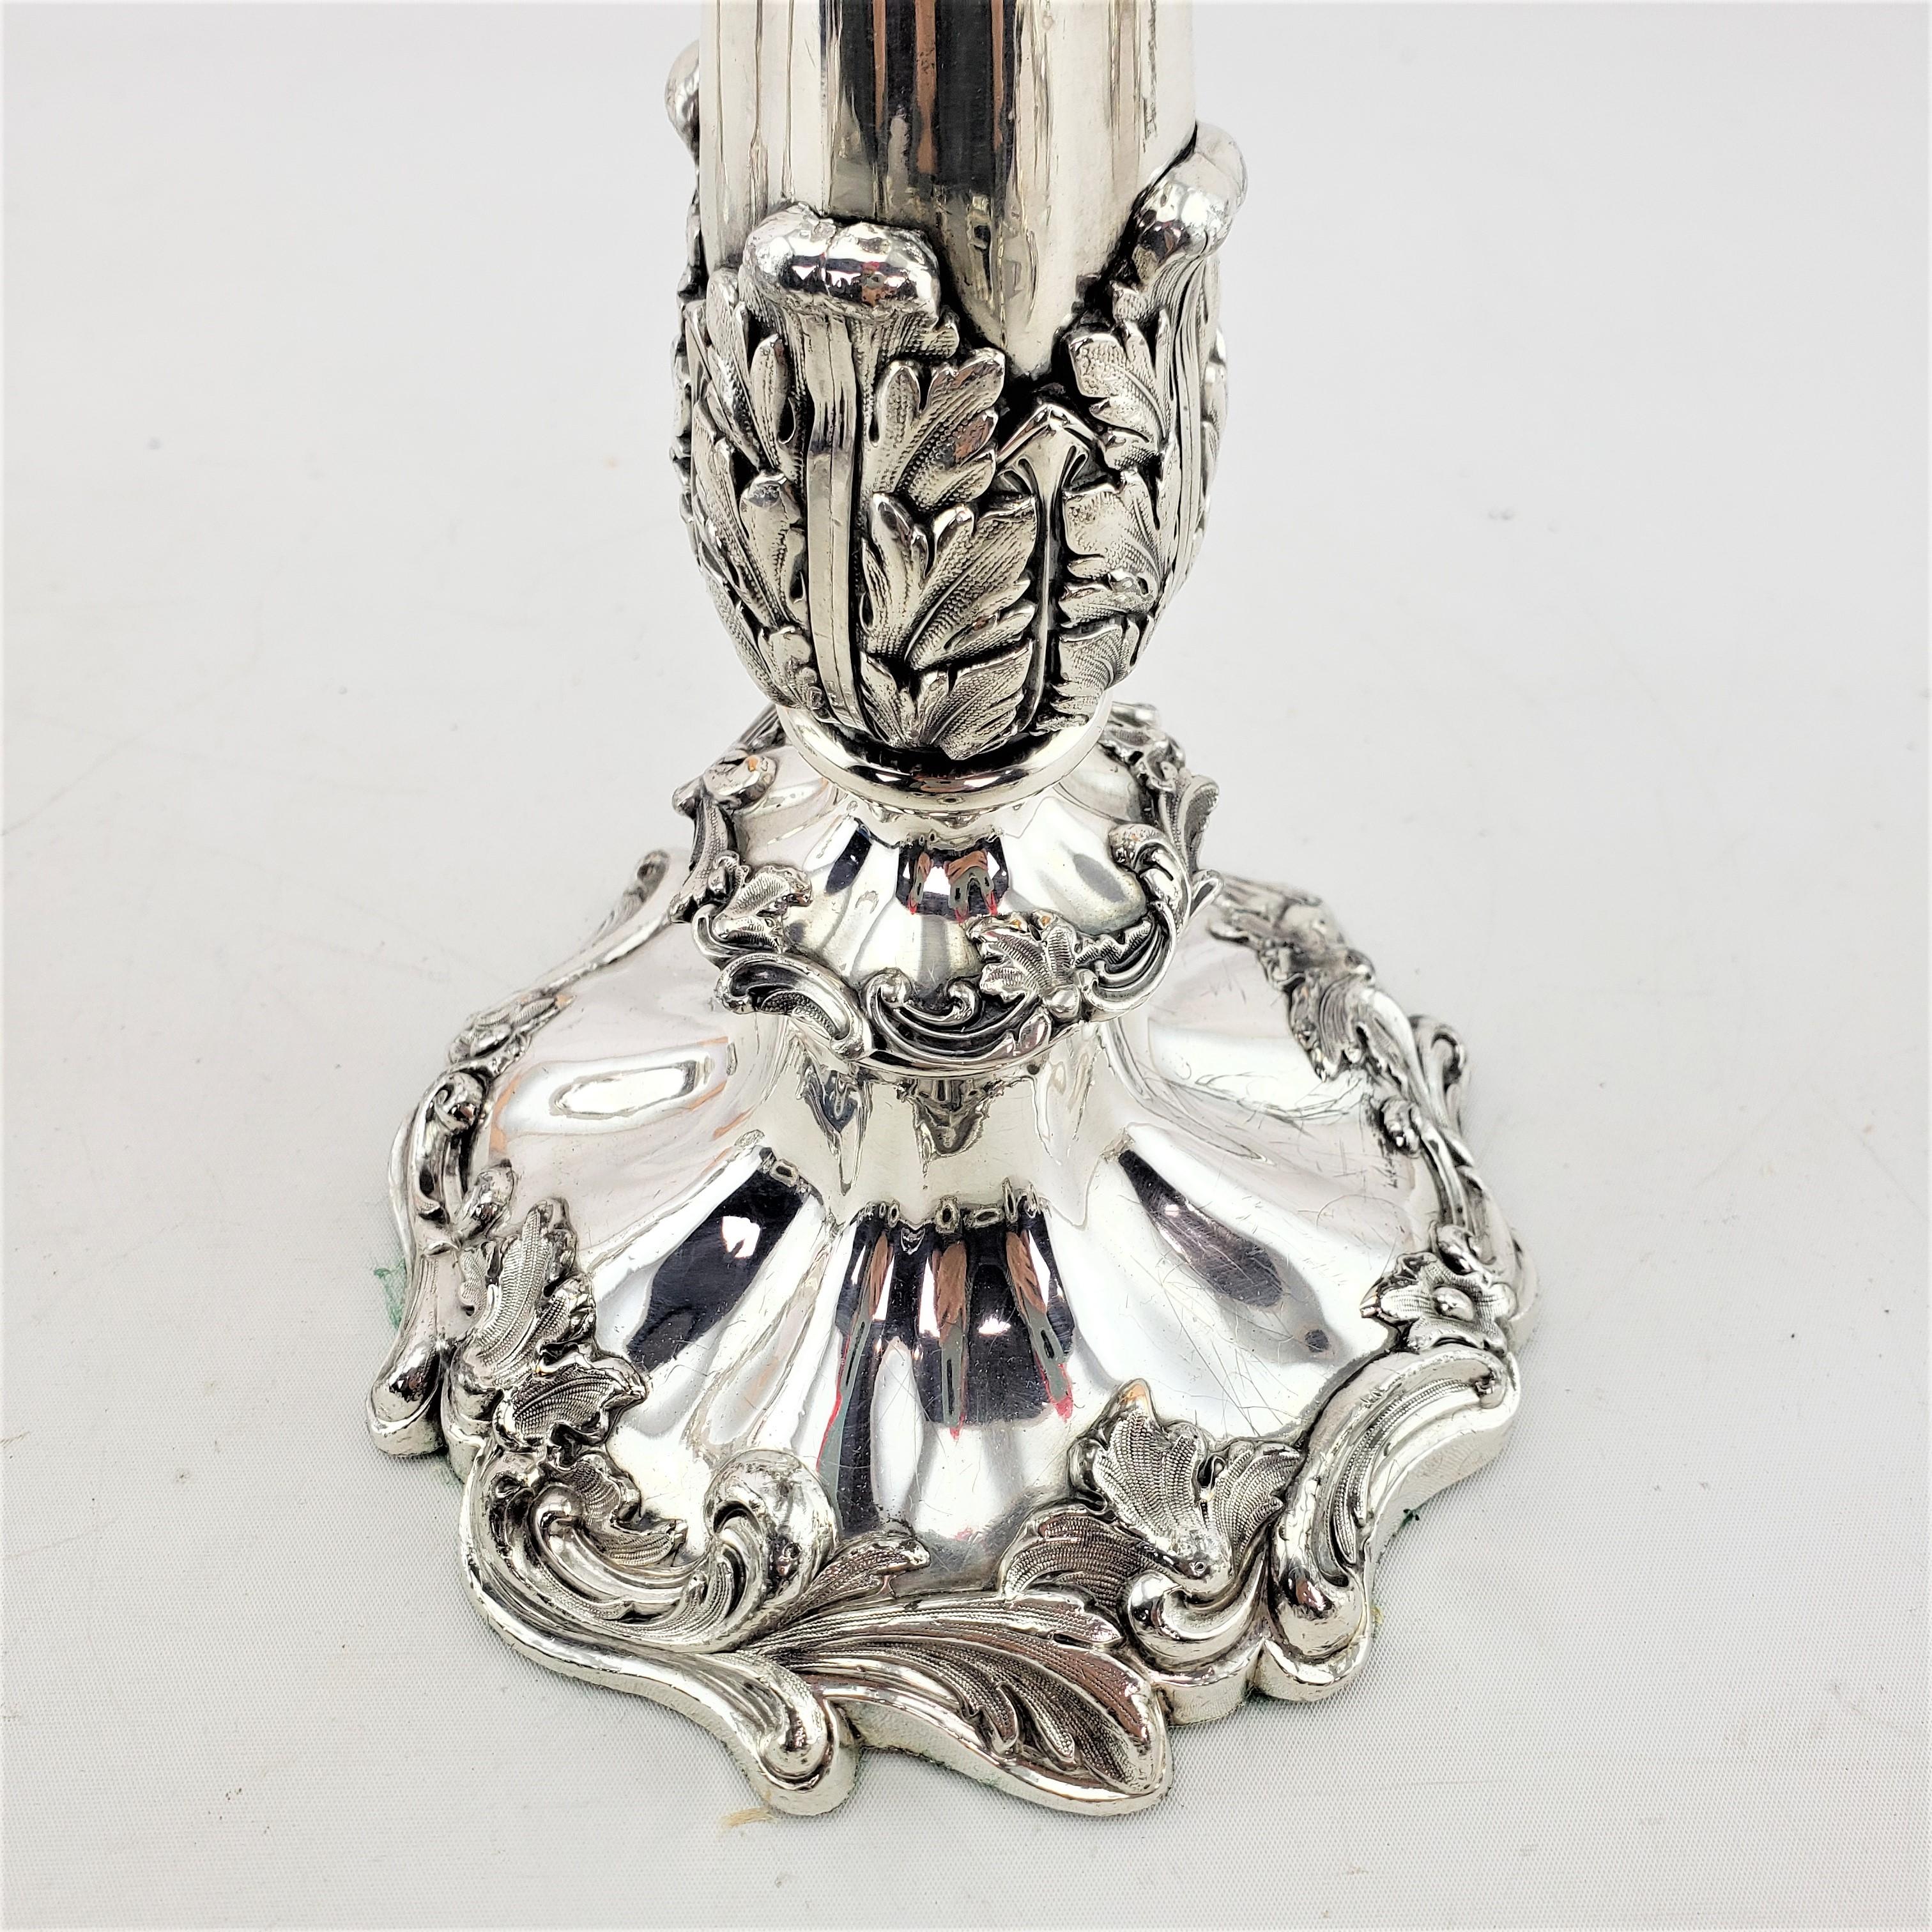 Antique Silver Plated Convertible Candelabras or Candlesticks with Leaf Decor For Sale 7